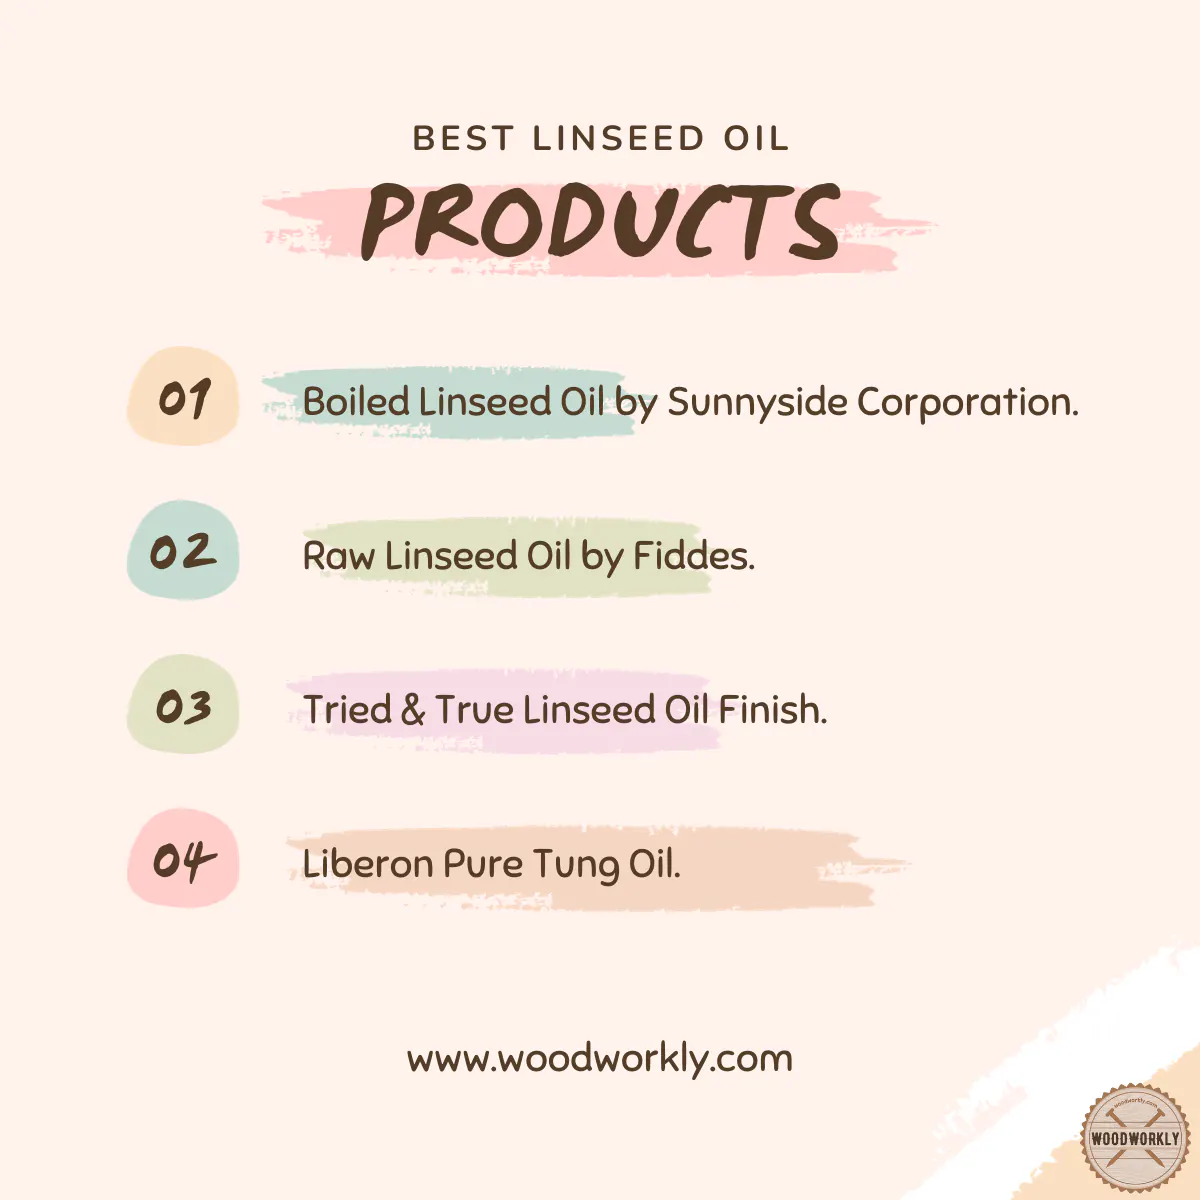 Best Linseed oil products